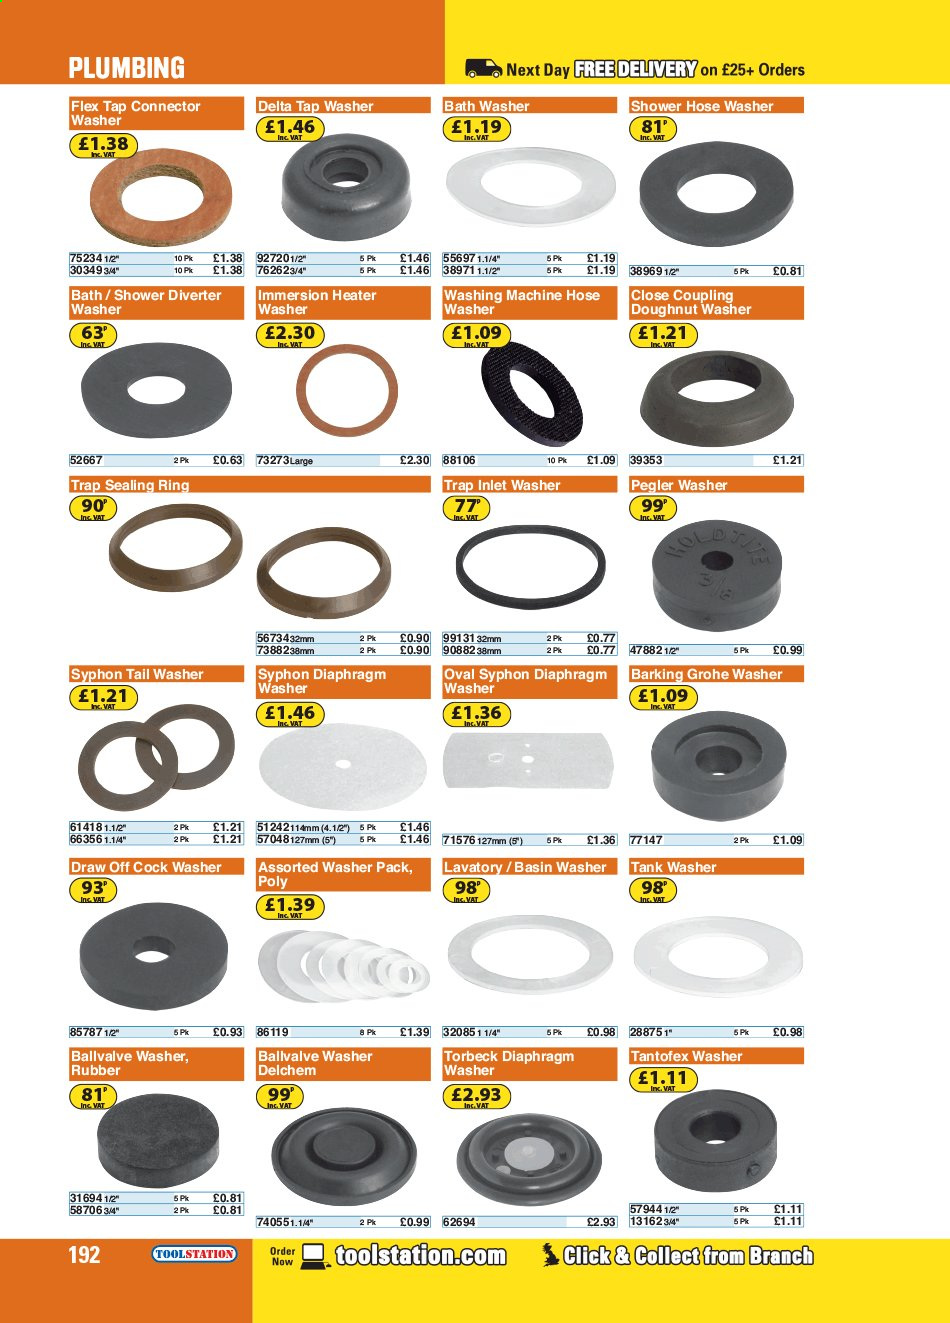 Toolstation offer . Page 192.